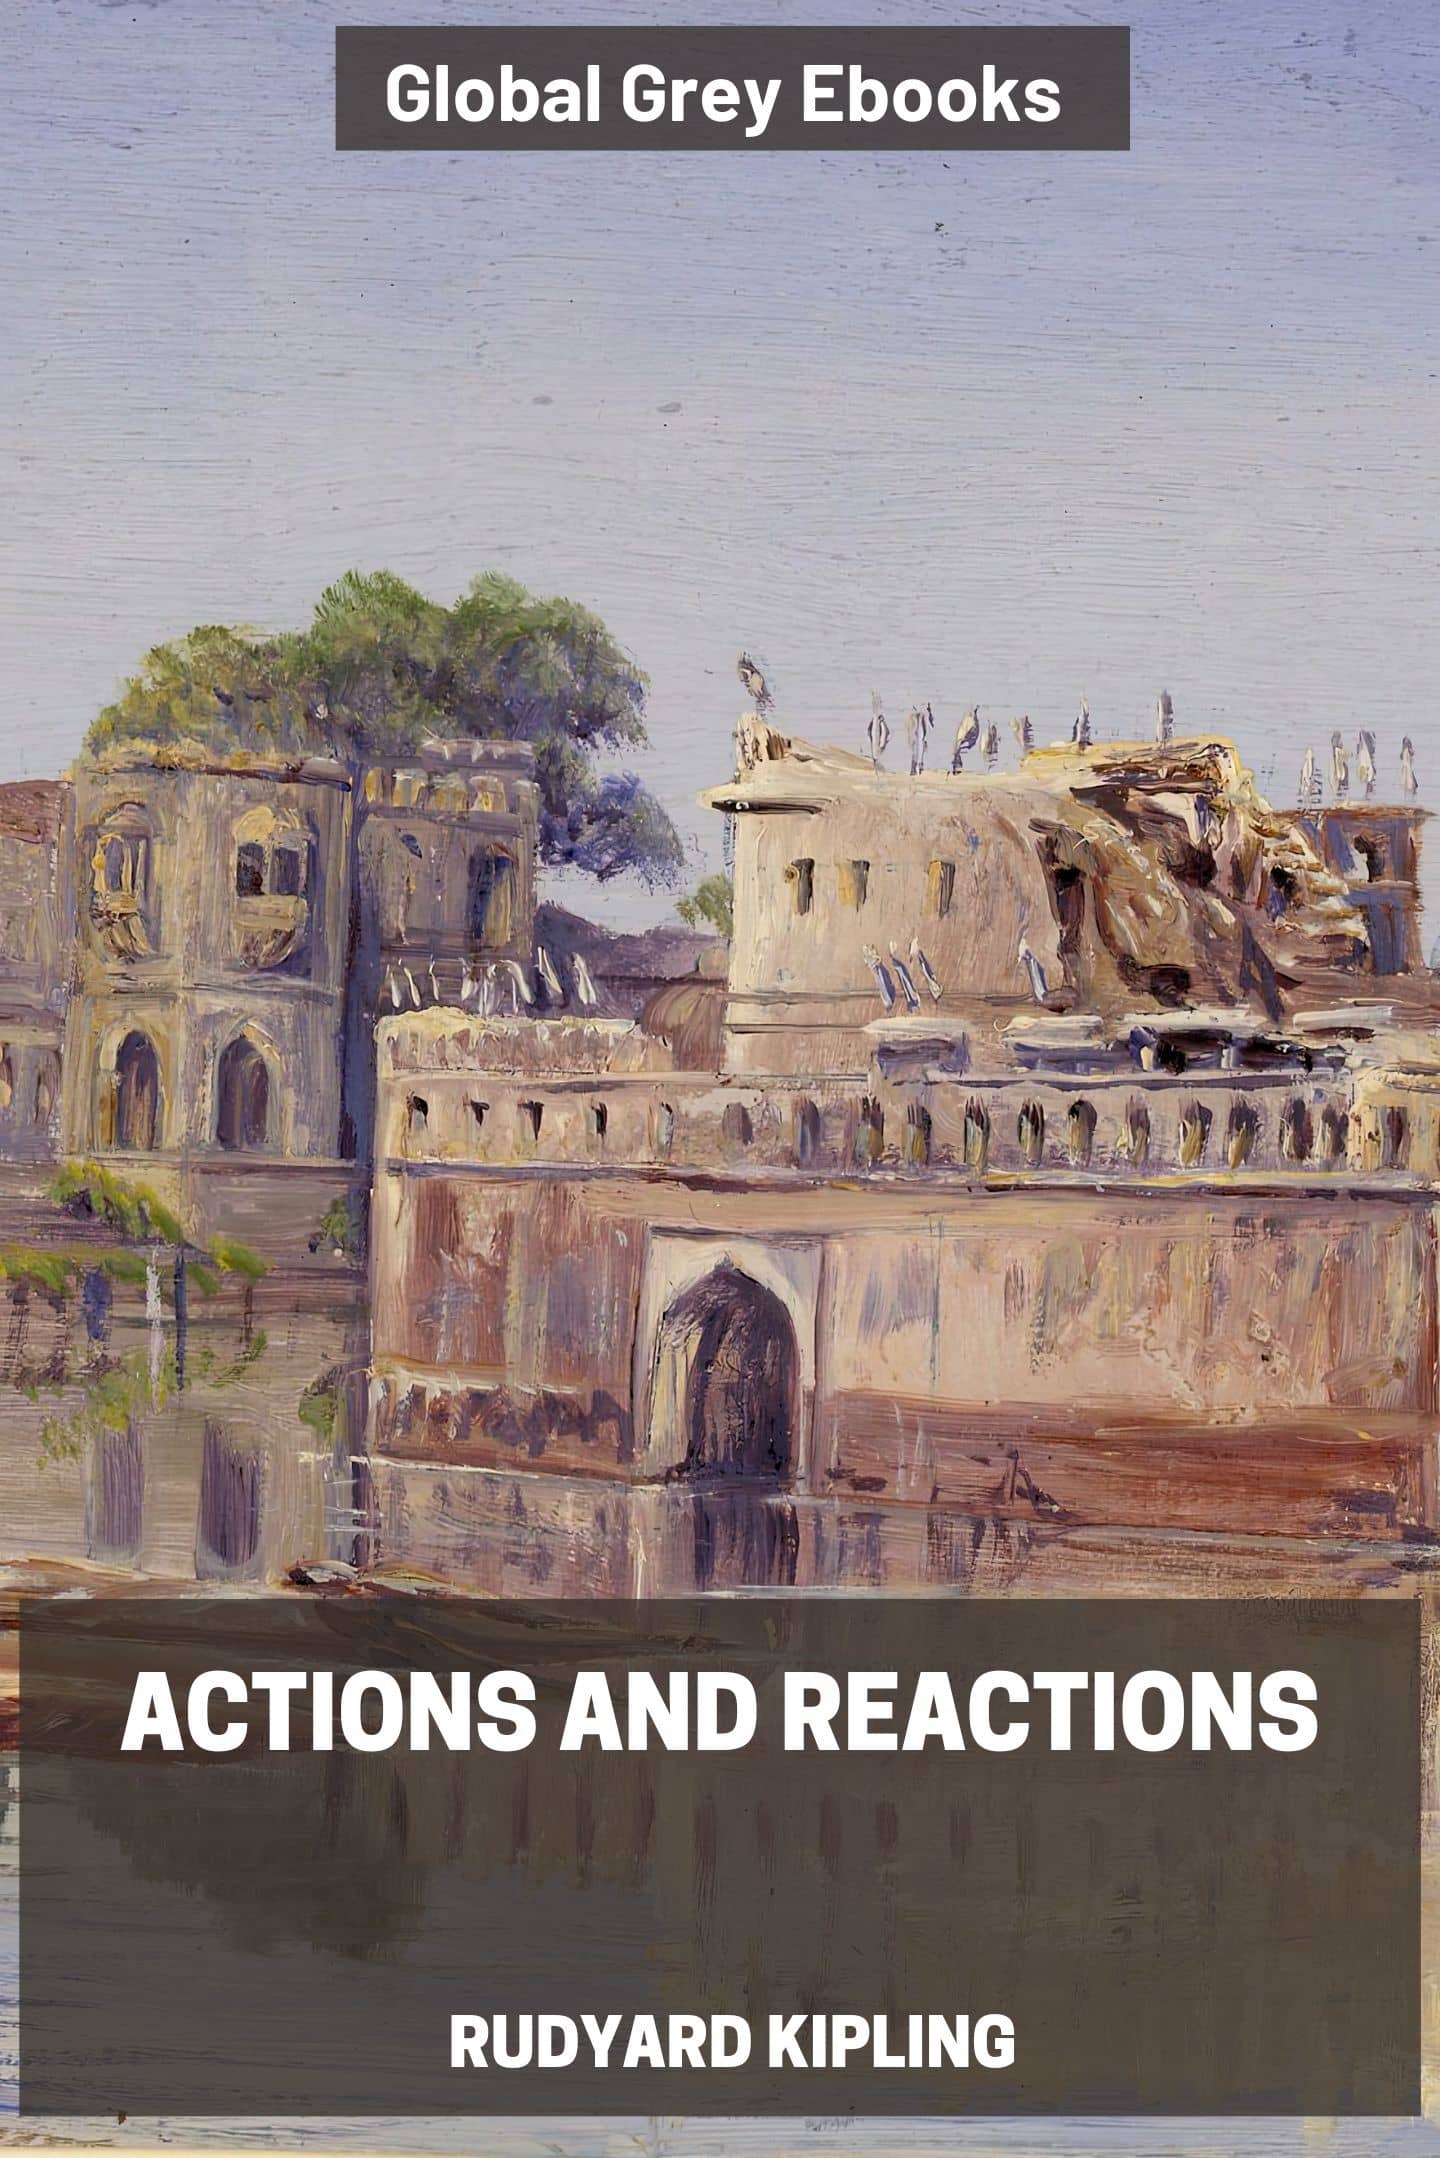 Actions and Reactions, by Rudyard Kipling - Complete text online